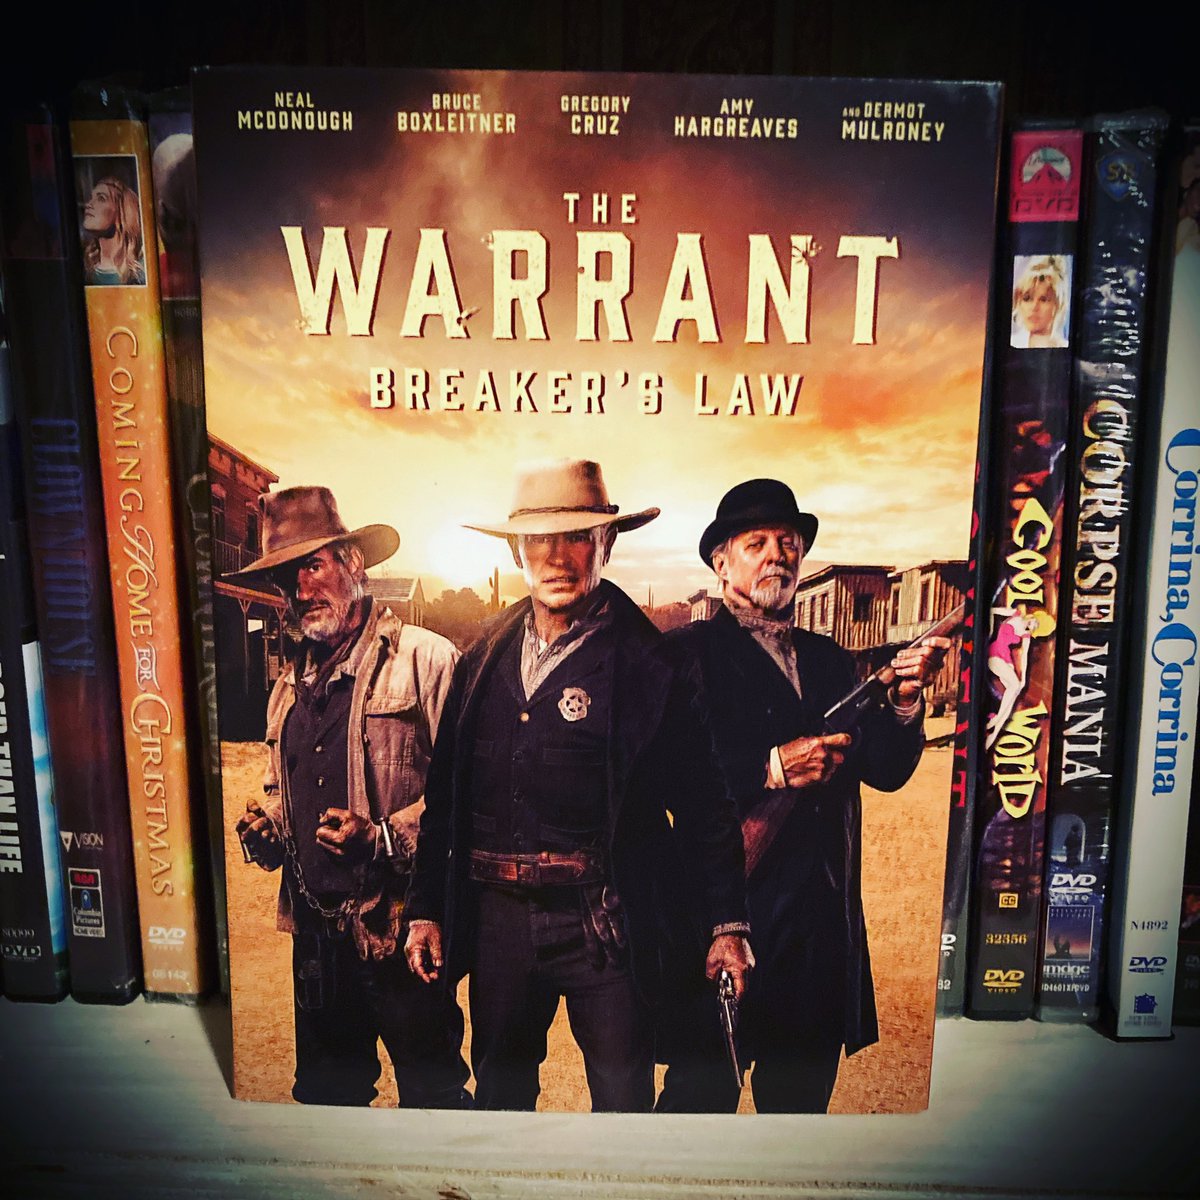 The Warrant: Breaker's Law courtesy of @millcreekent. #western #NealMcDonough #BruceBoxleitner